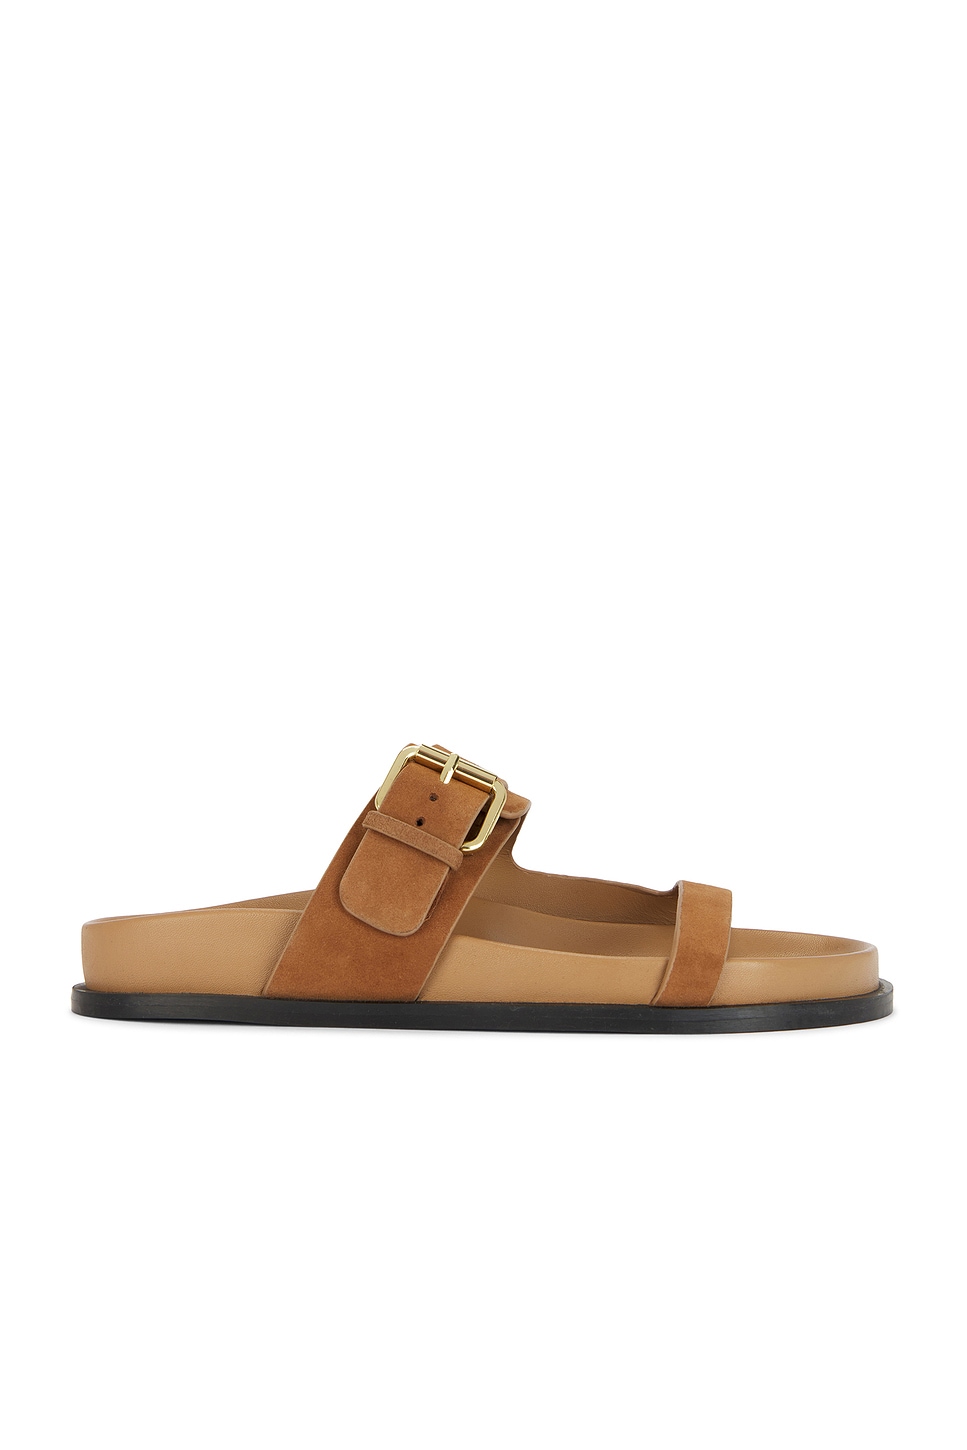 Image 1 of A.EMERY Prince Sandal in Nutmeg Suede